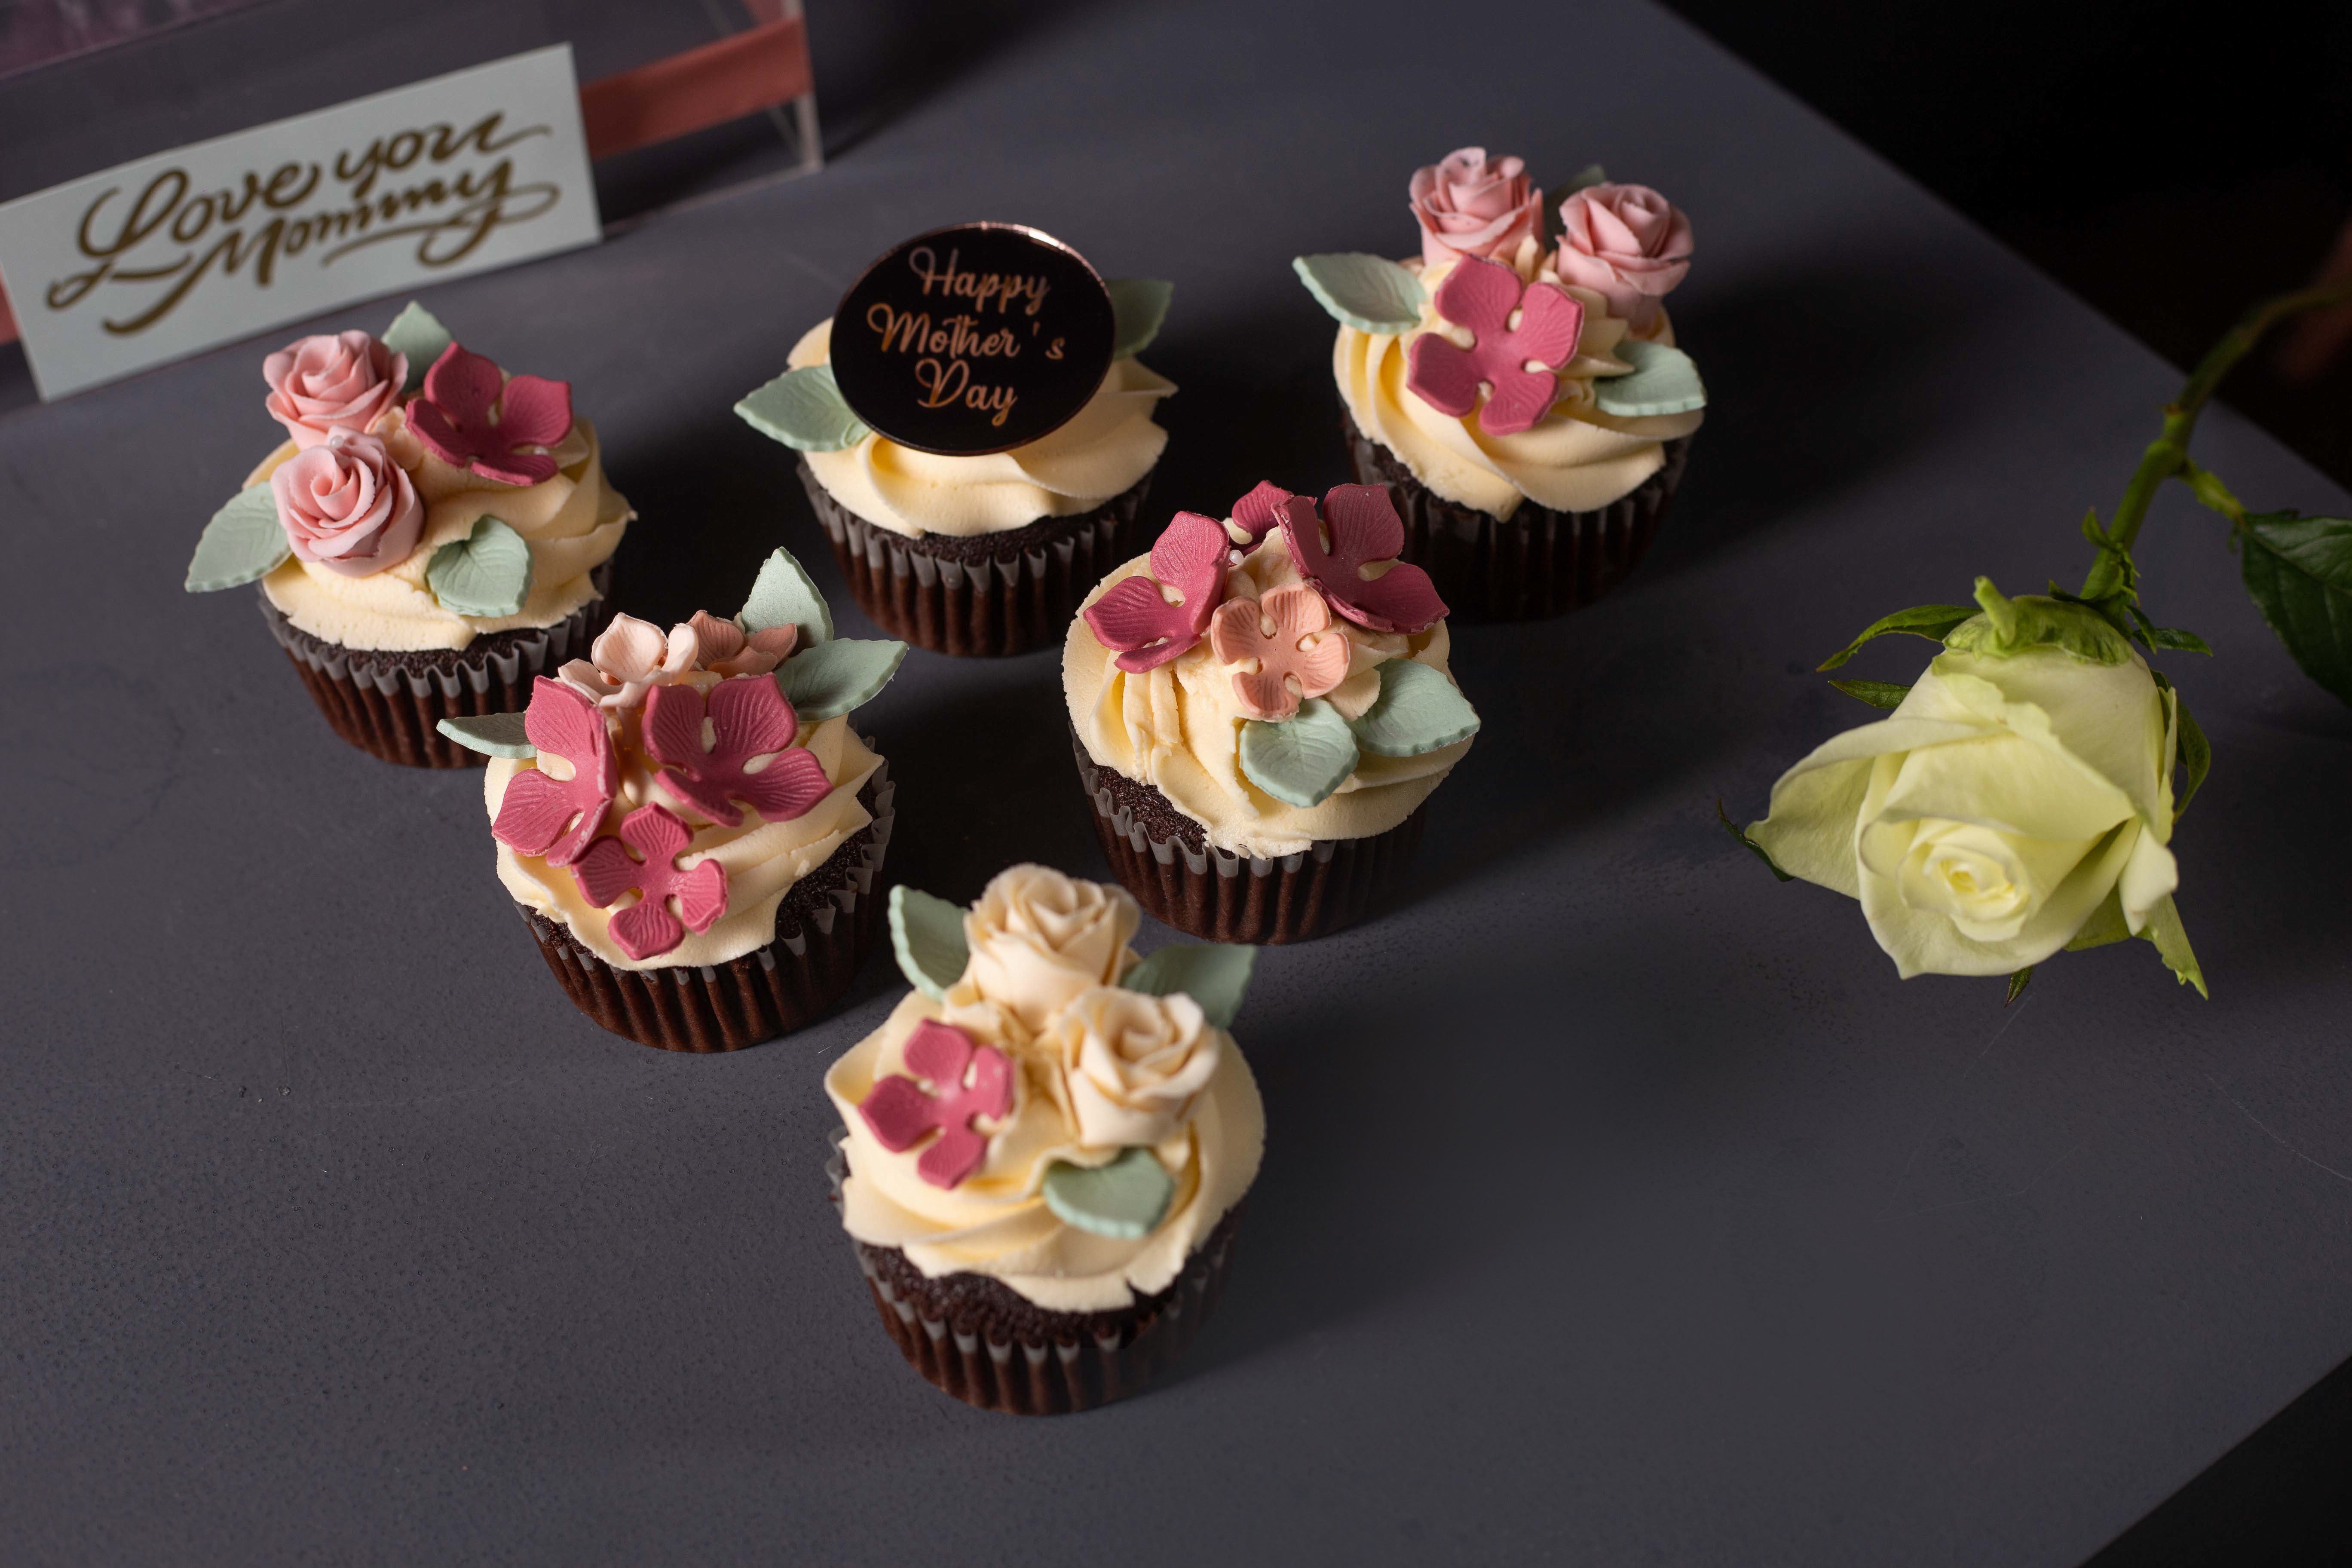 6 Delightful Wedding Cupcakes That Your Guests Will Adore!